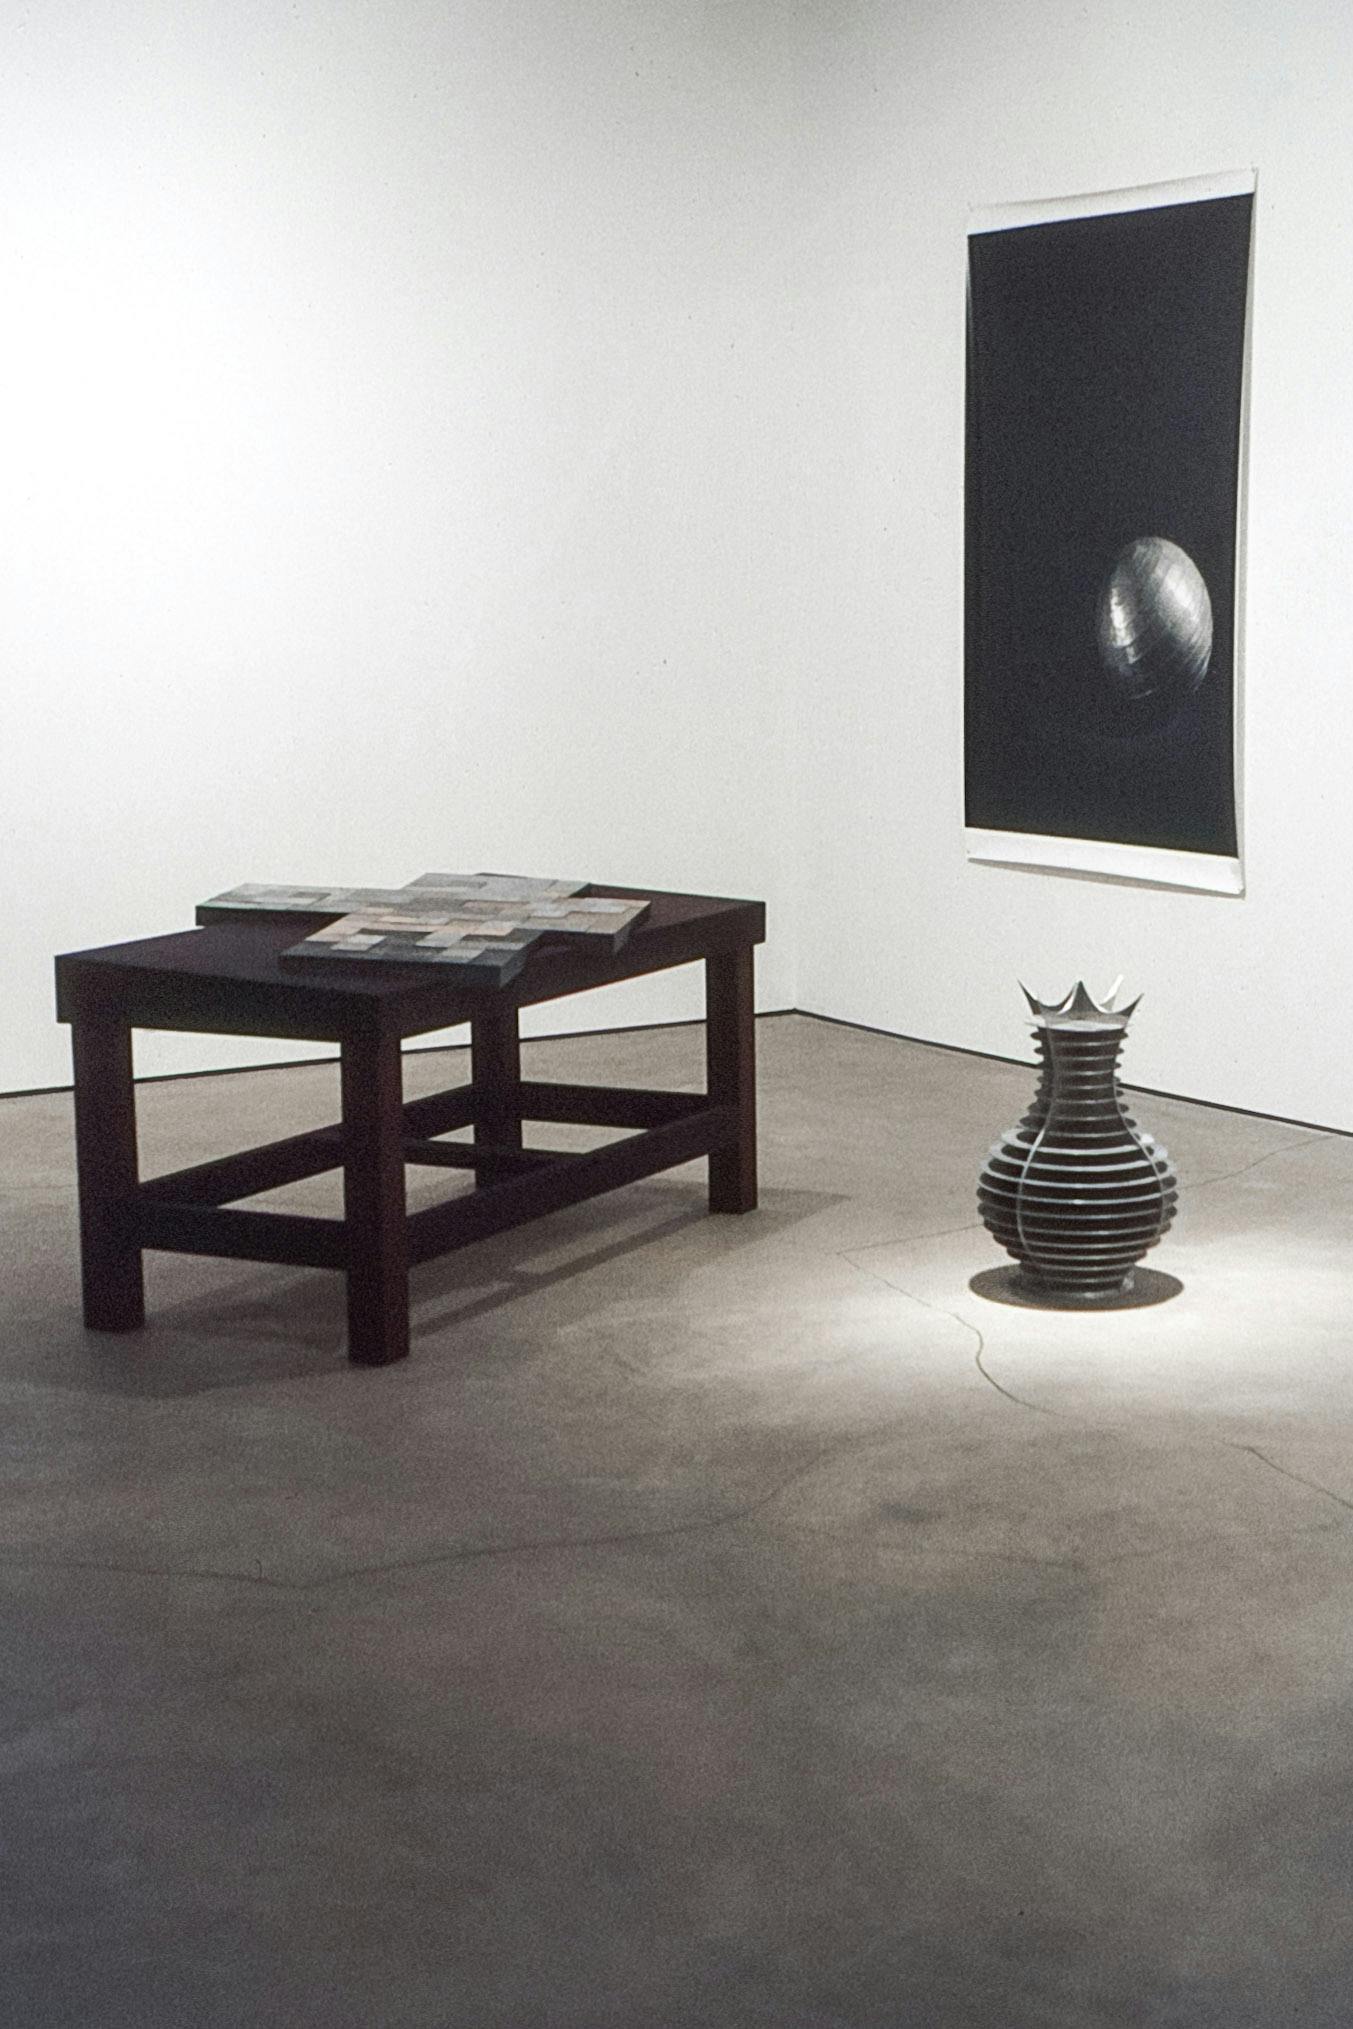 The corner of a gallery space. A large photo of a silver ball in a dark room is on a wall. On the floor, a table with an asymmetrical cross painting on it, and a vase with metal detailing beside it.